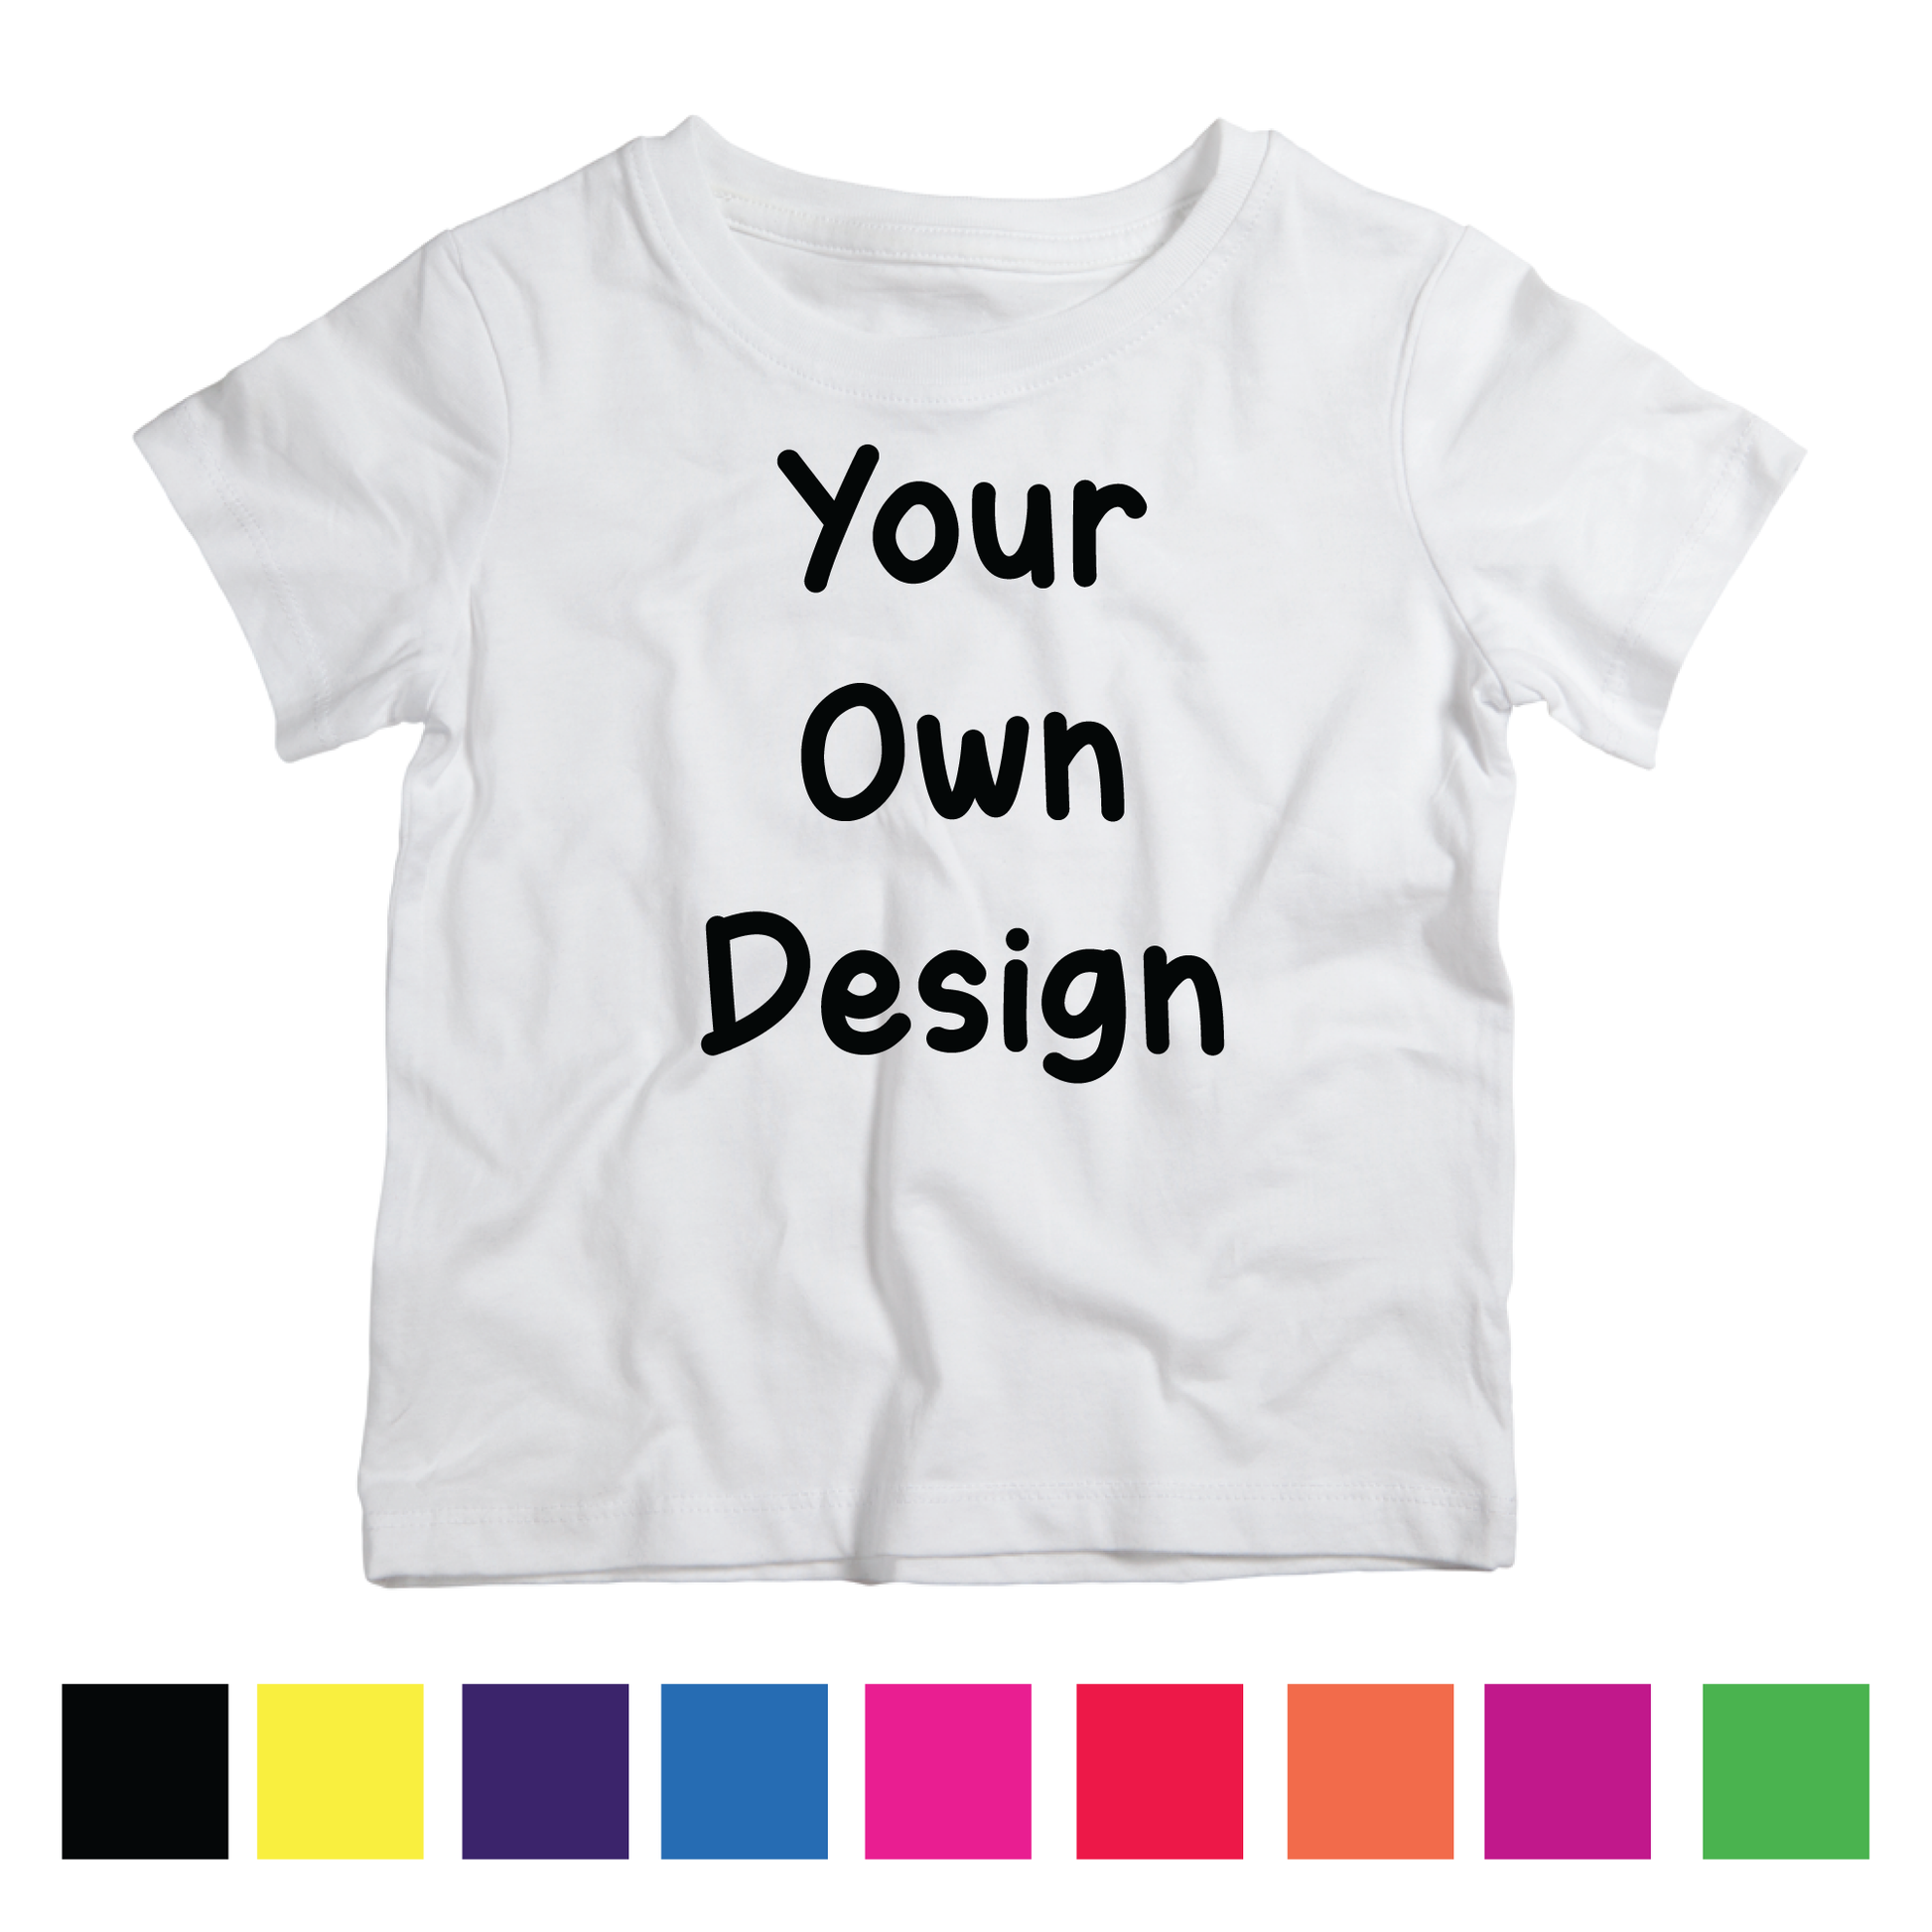 Customized T-shirt with unique design, perfect for expressing your individual style and making a personalized fashion statement